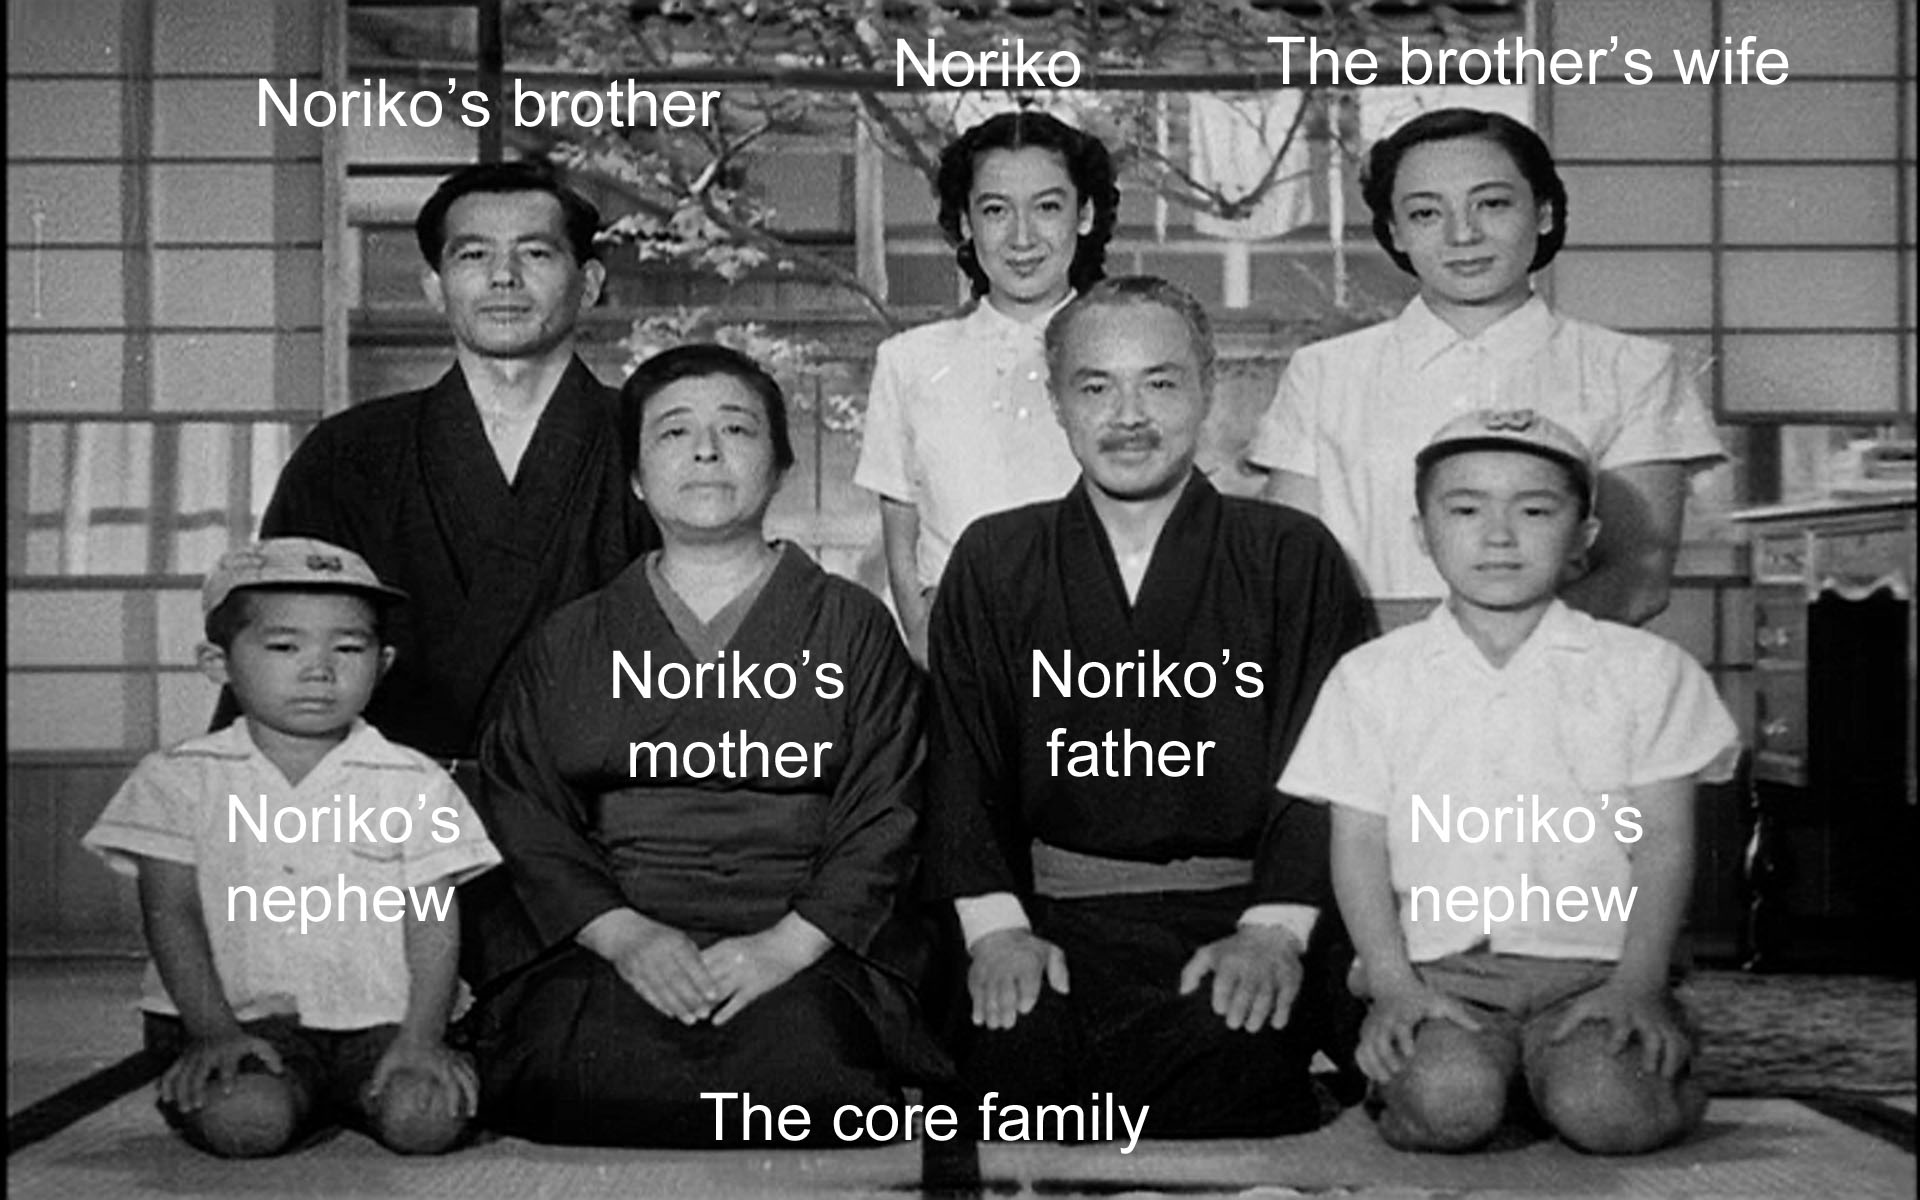 The core family